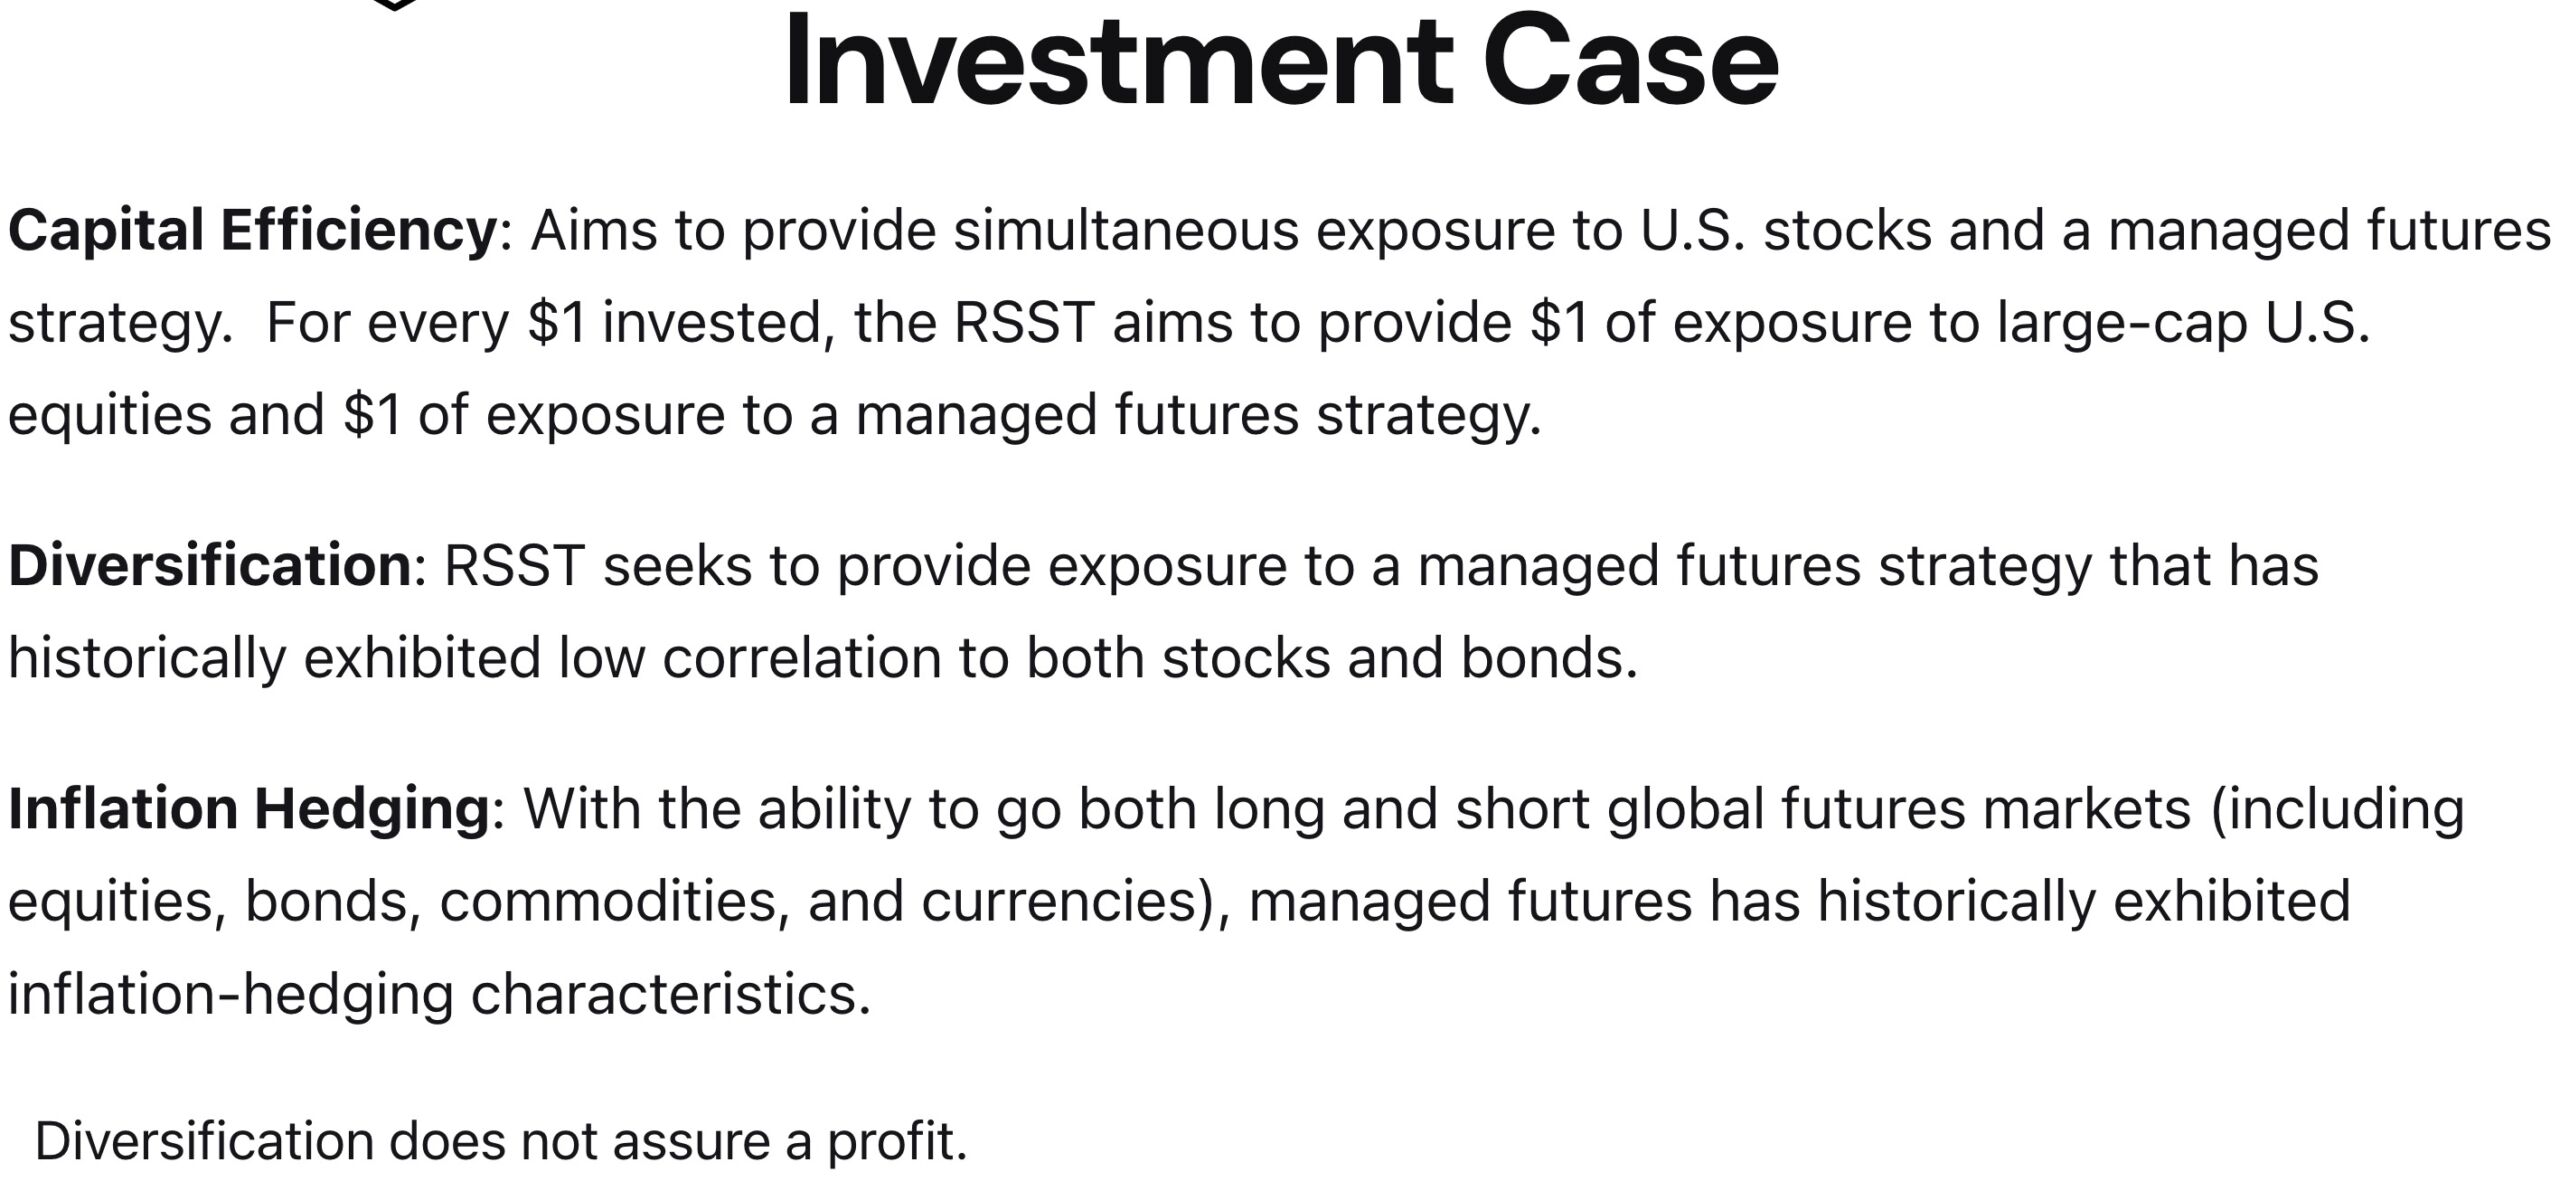 RSST ETF Investment Case: Investors should consider Return Stacked US Stocks & Managed Futures ETF for capital efficiency, diversification and inflation hedging potential benefits